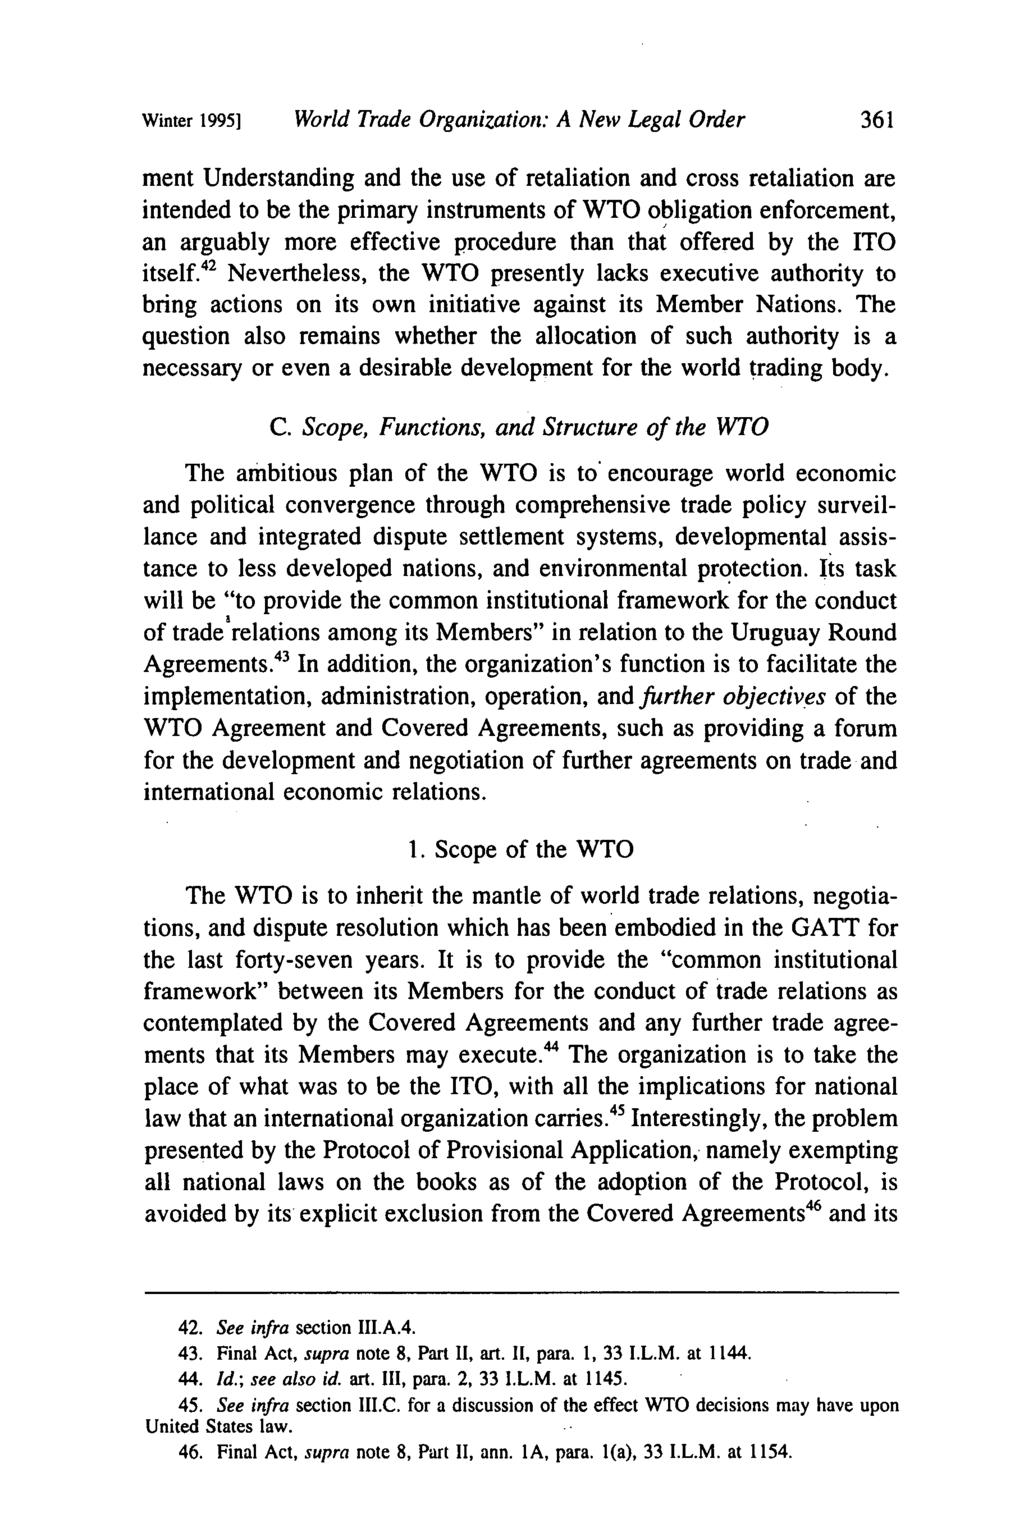 Winter 1995] World Trade Organization: A New Legal Order ment Understanding and the use of retaliation and cross retaliation are intended to be the primary instruments of WTO obligation enforcement,